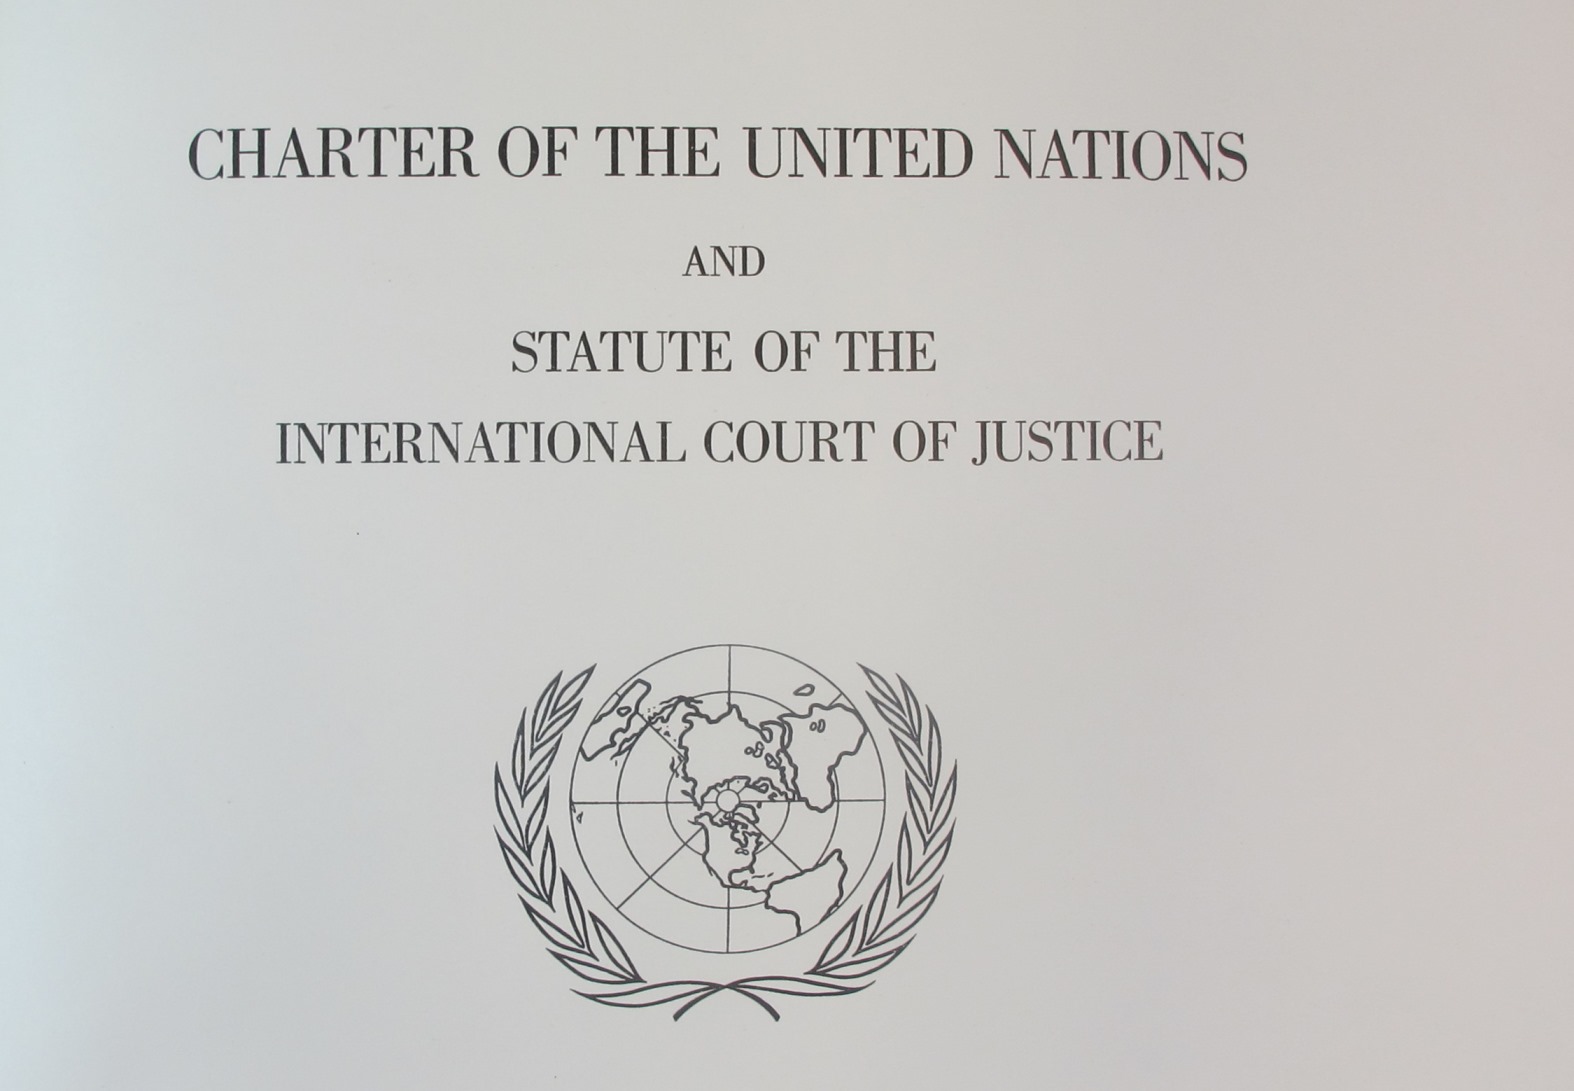 Image of text which reads 'Charter of the United Nations and Statute of the International Court of Justice'